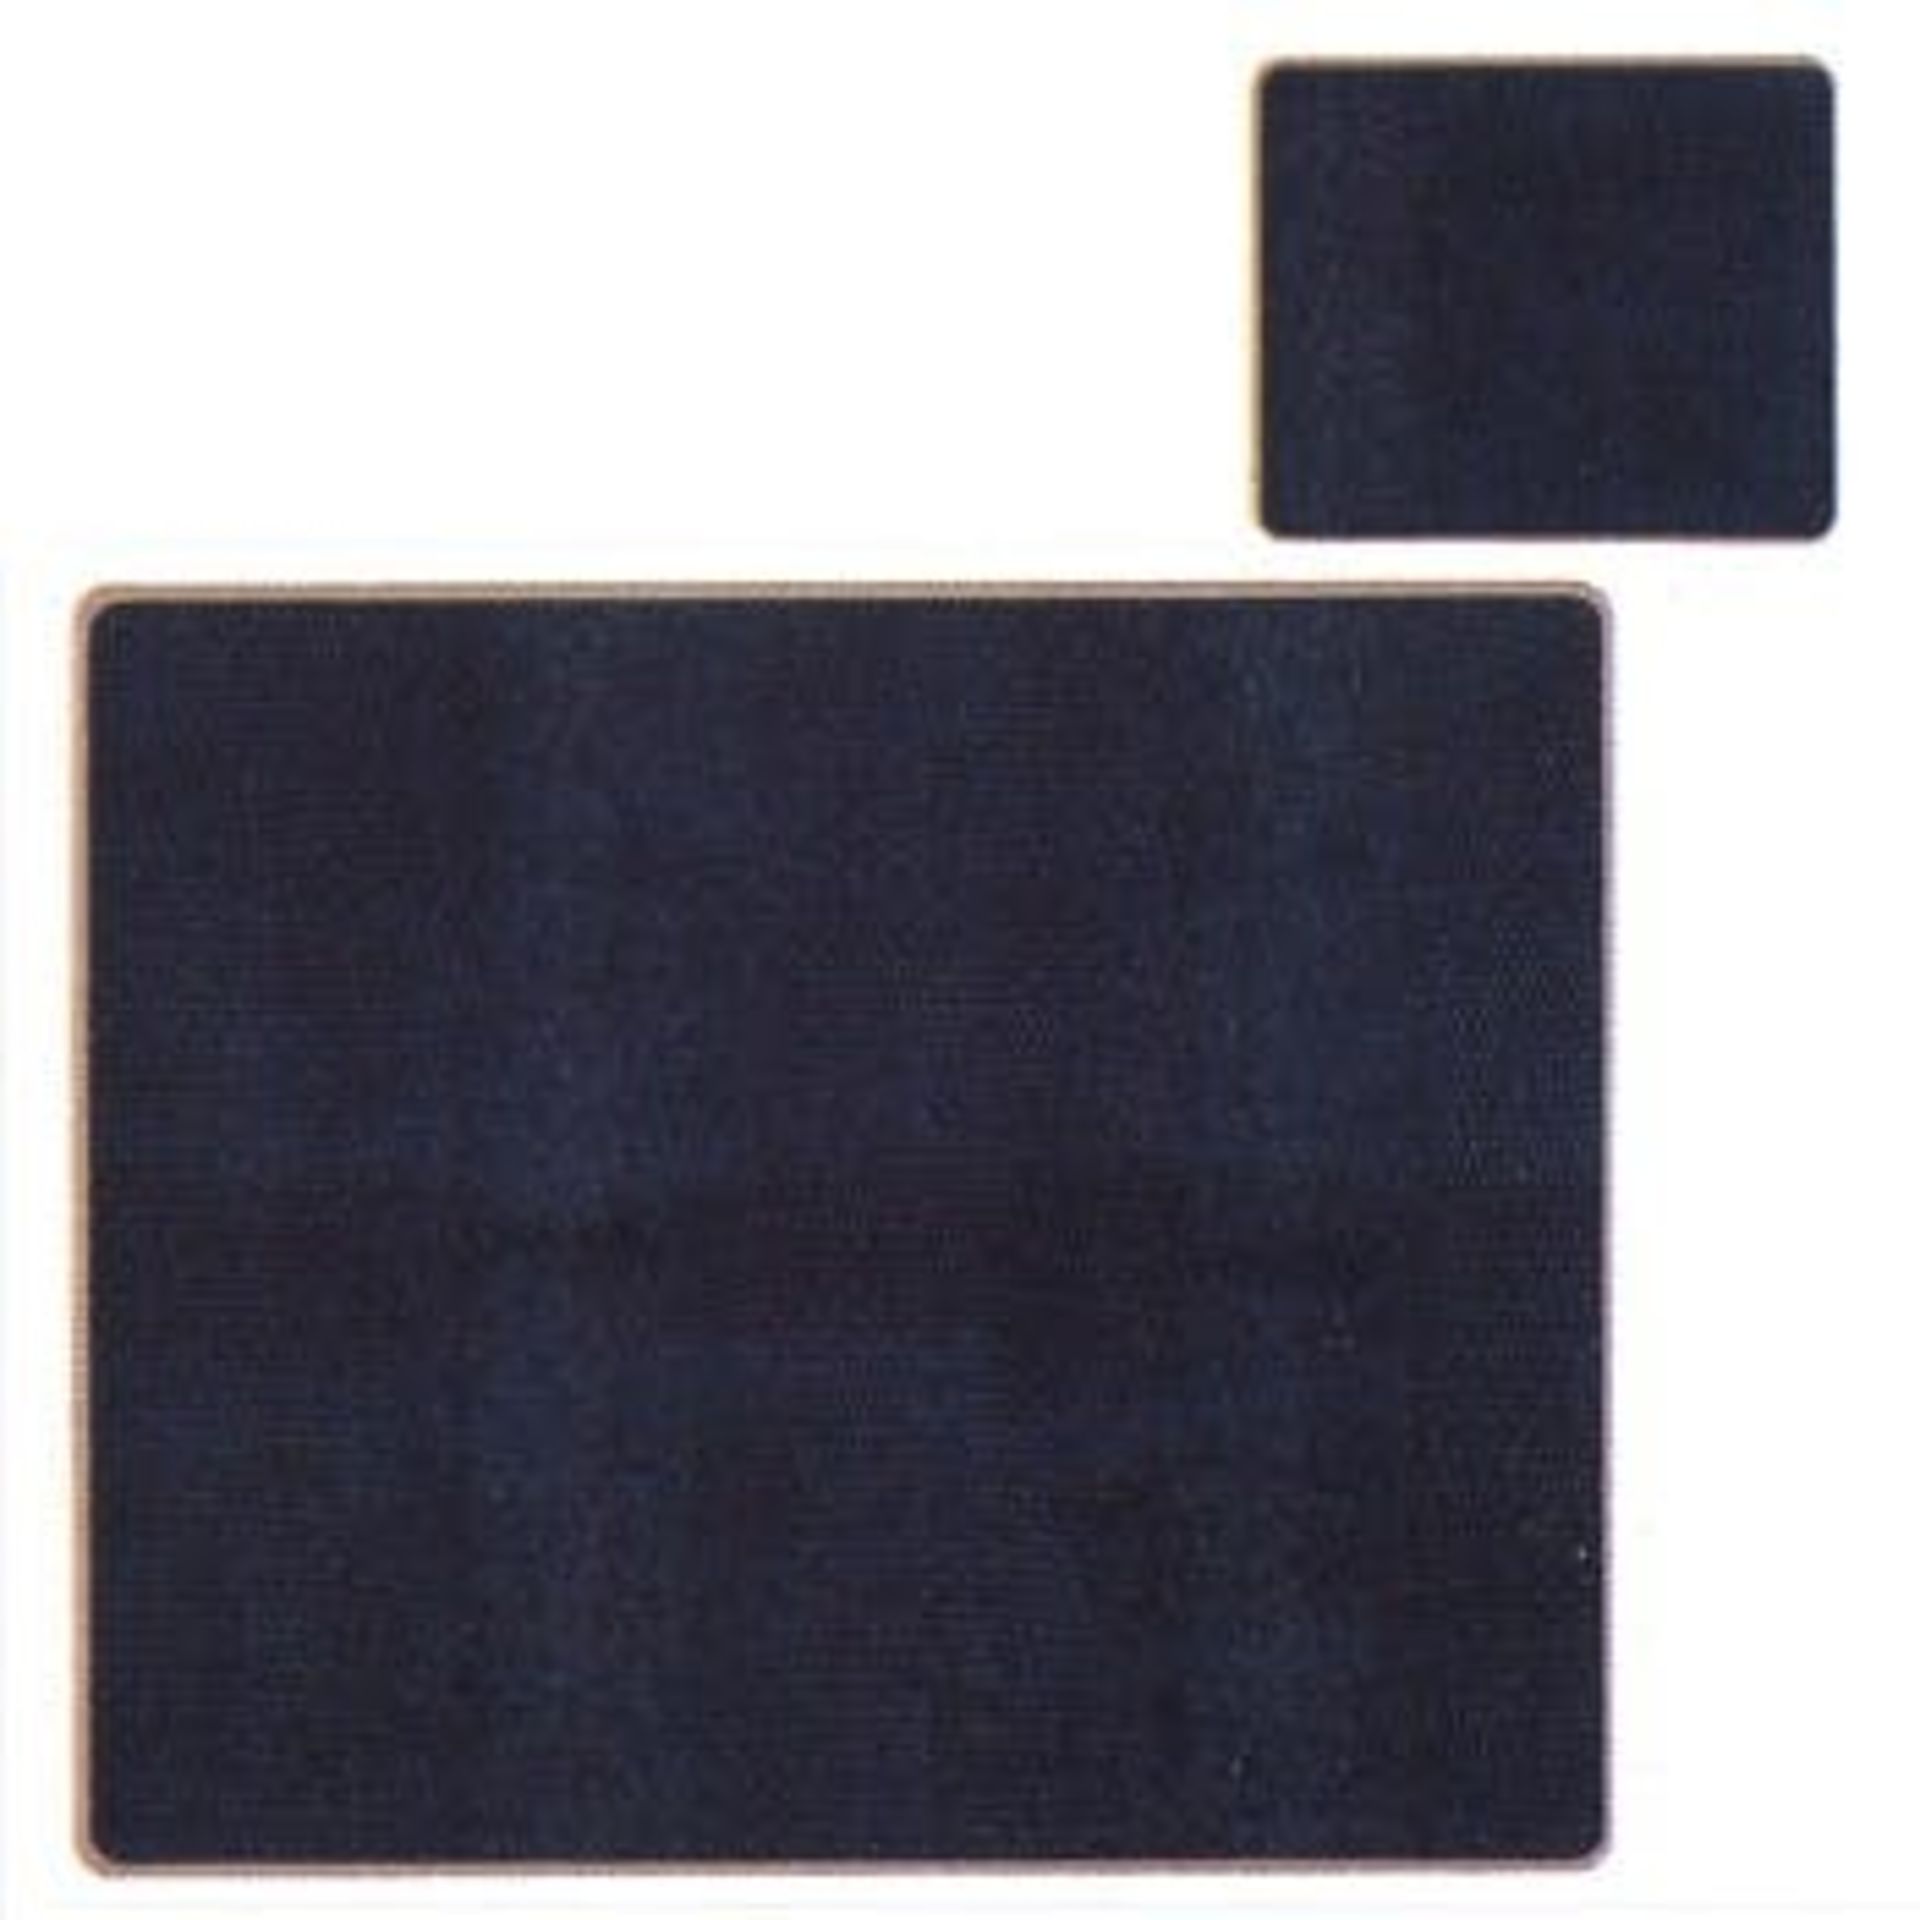 Lady Clare Set Of 6 Tablemats With Frame Line 24 X 20cm Lady Clare Texture Range - Lizard Black RRP